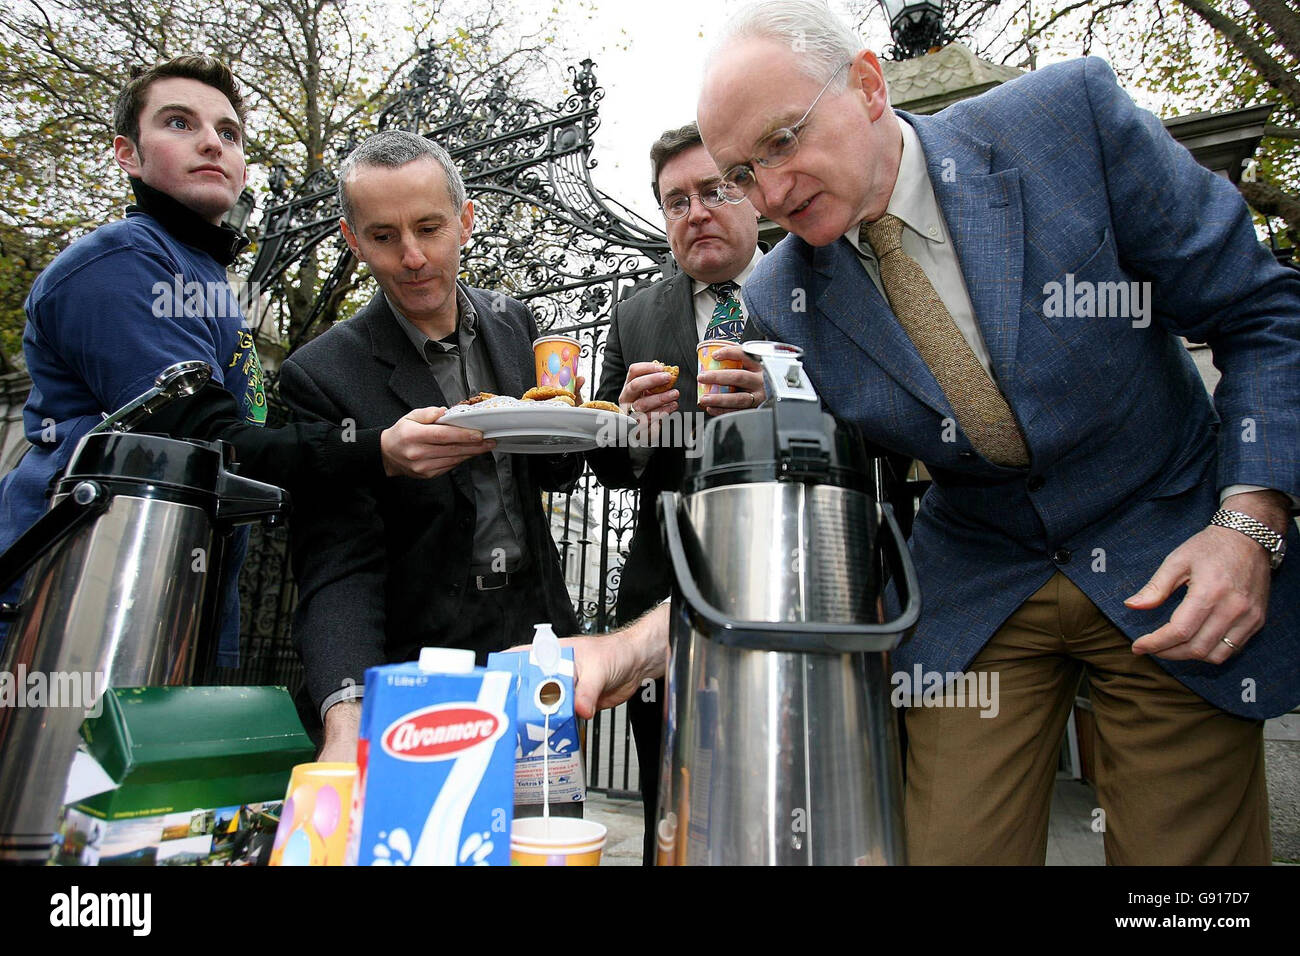 Green Party TD's r-l John Gormley,Dan Boyle and Ciaran Cuffe with Ewan Kelly of Young Greens (left) outside Leinster House Dublin Wednesday Nov 23 2005 having a cup of Fair Trade Tea and Biscuits.The Young Greens were launching 'Fair Trade Nation' calling on all State Organisations to use Fair Trade Products. See PA Story POLITICS Free Trade. PRESS ASSOCIATION PHOTO. Photo credit should read Julien Behal./PA Stock Photo